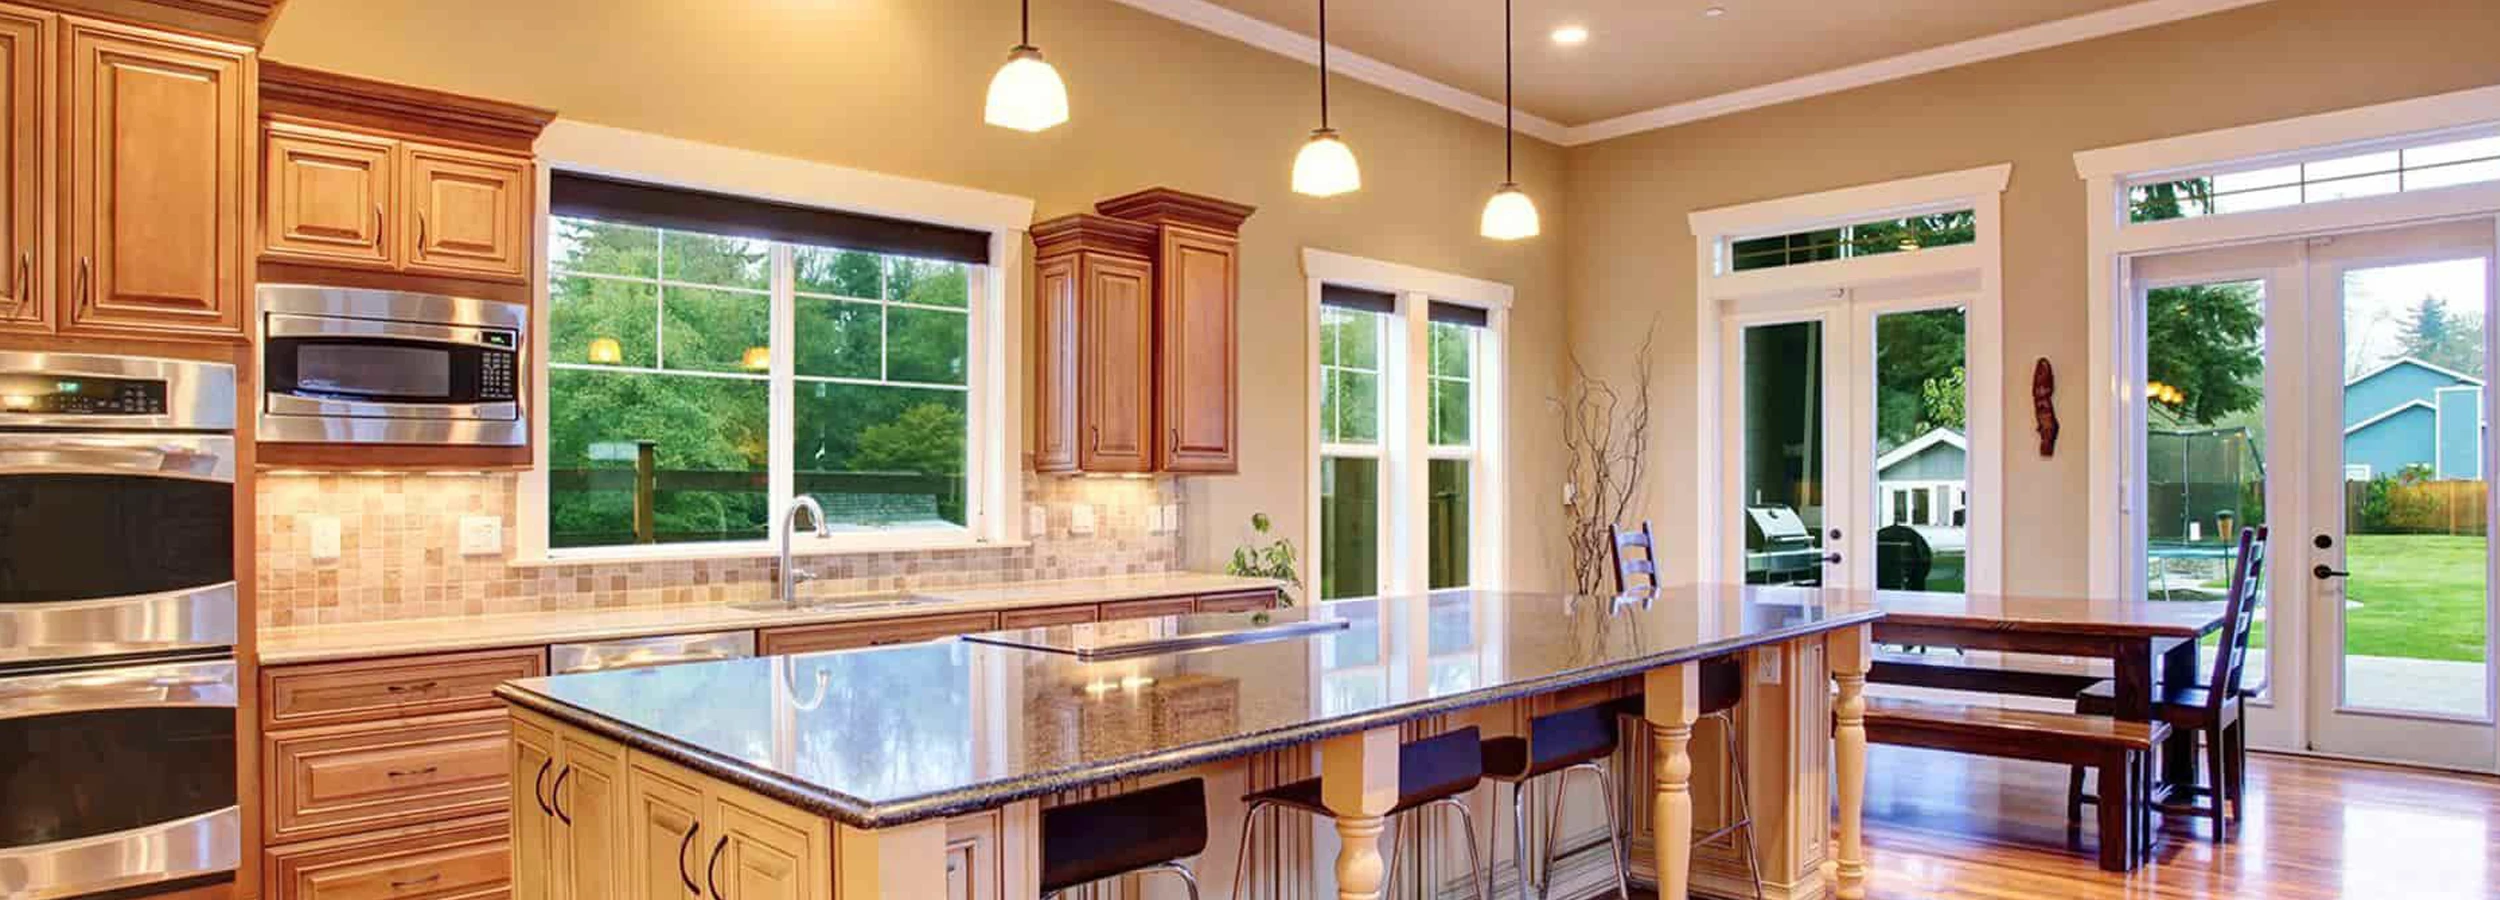 Brown contemporary kitchen with island with windows and french doors leading to backyard